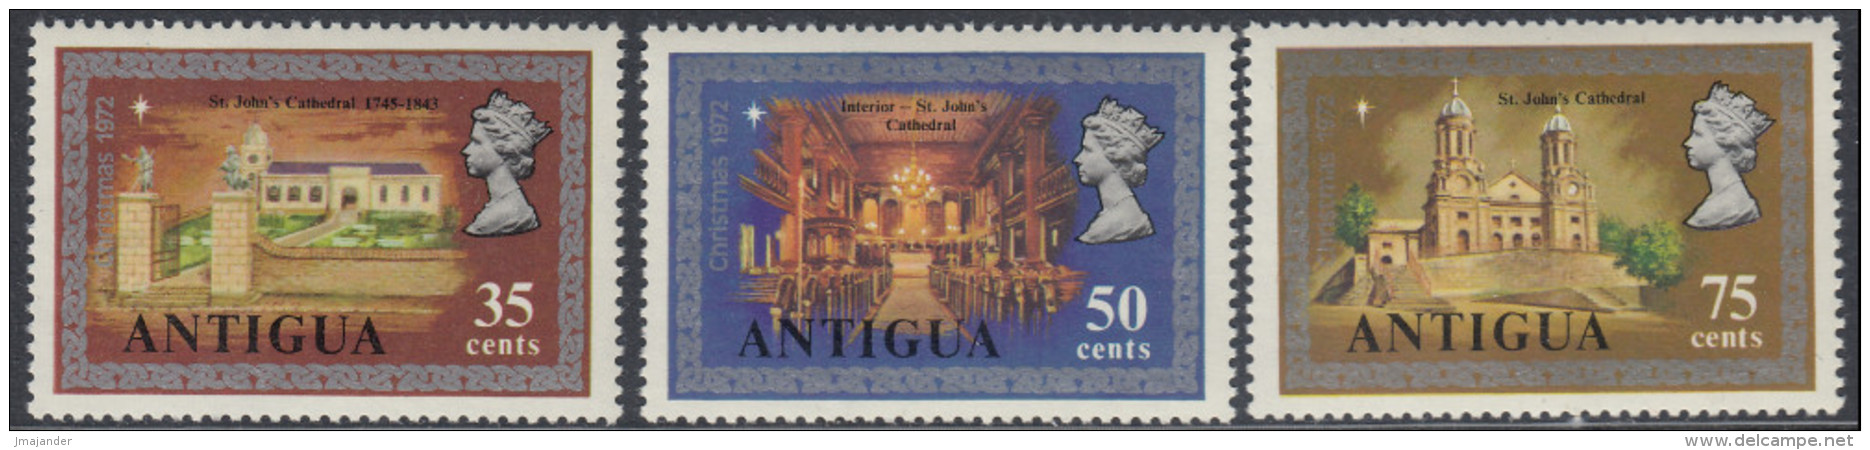 Antigua 1972 Christmas: St. John's Cathedral. Mi 281-283 MNH - 1960-1981 Ministerial Government